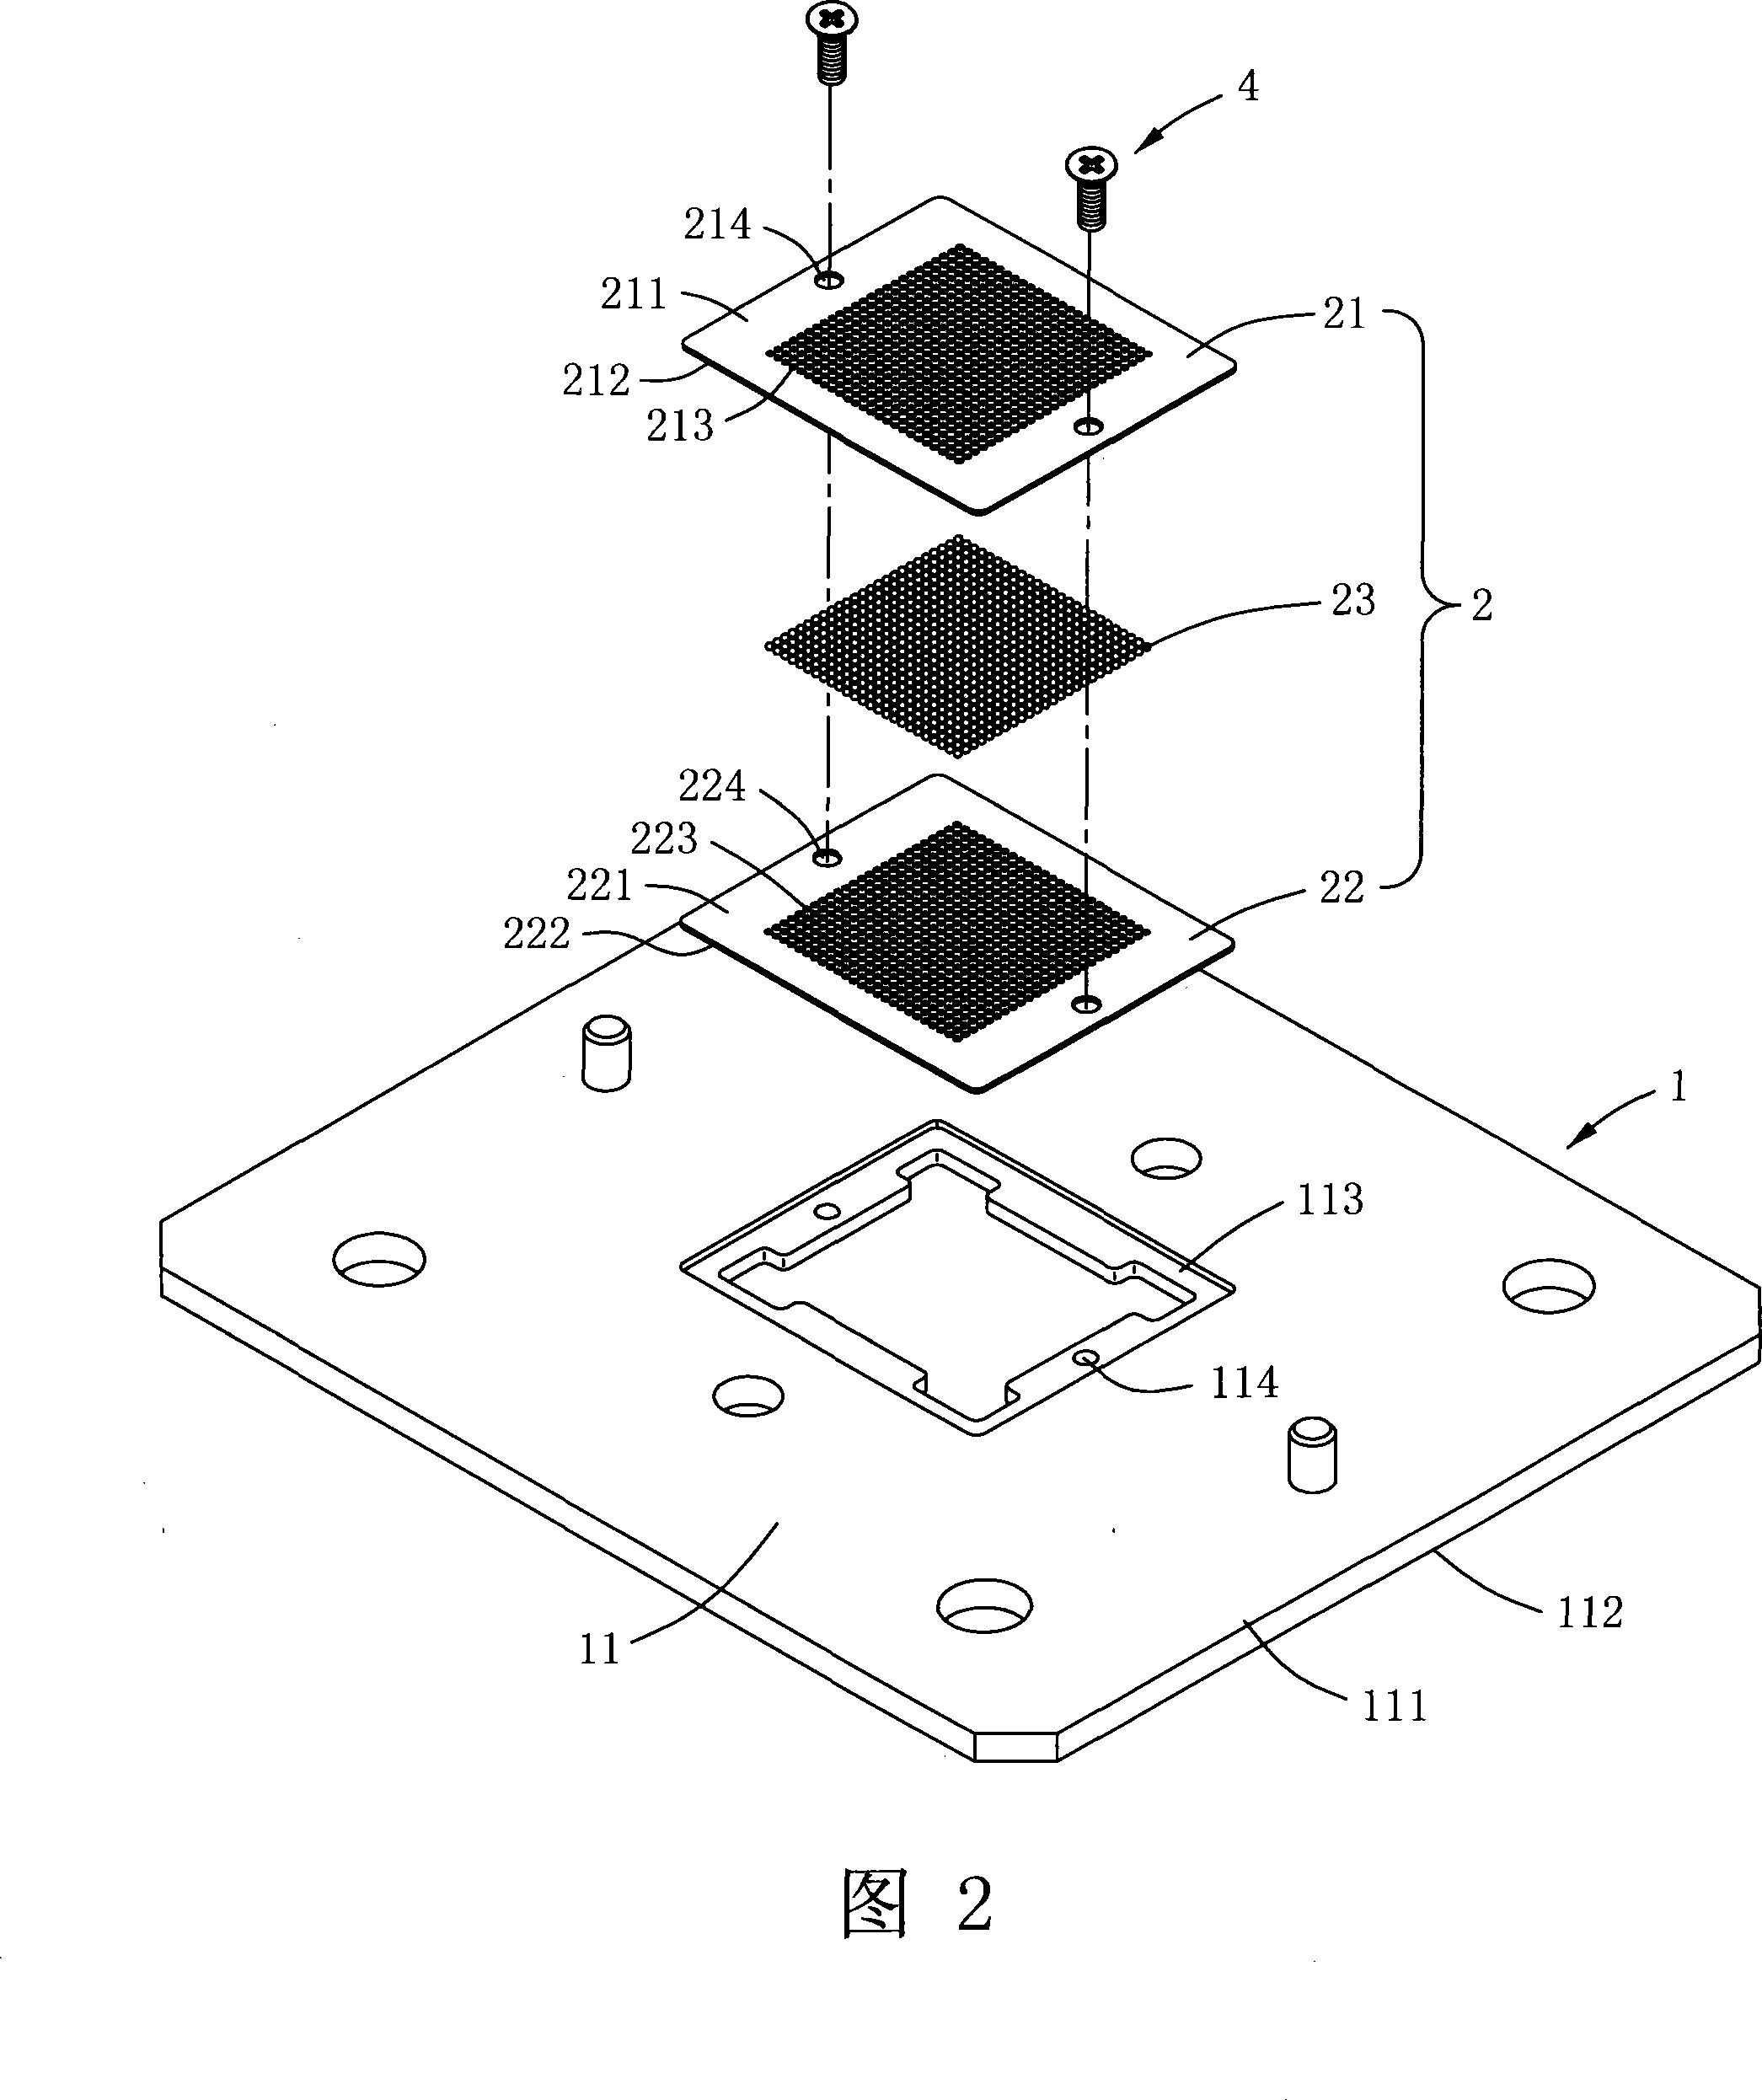 Integrated circuit test seat and its test interface